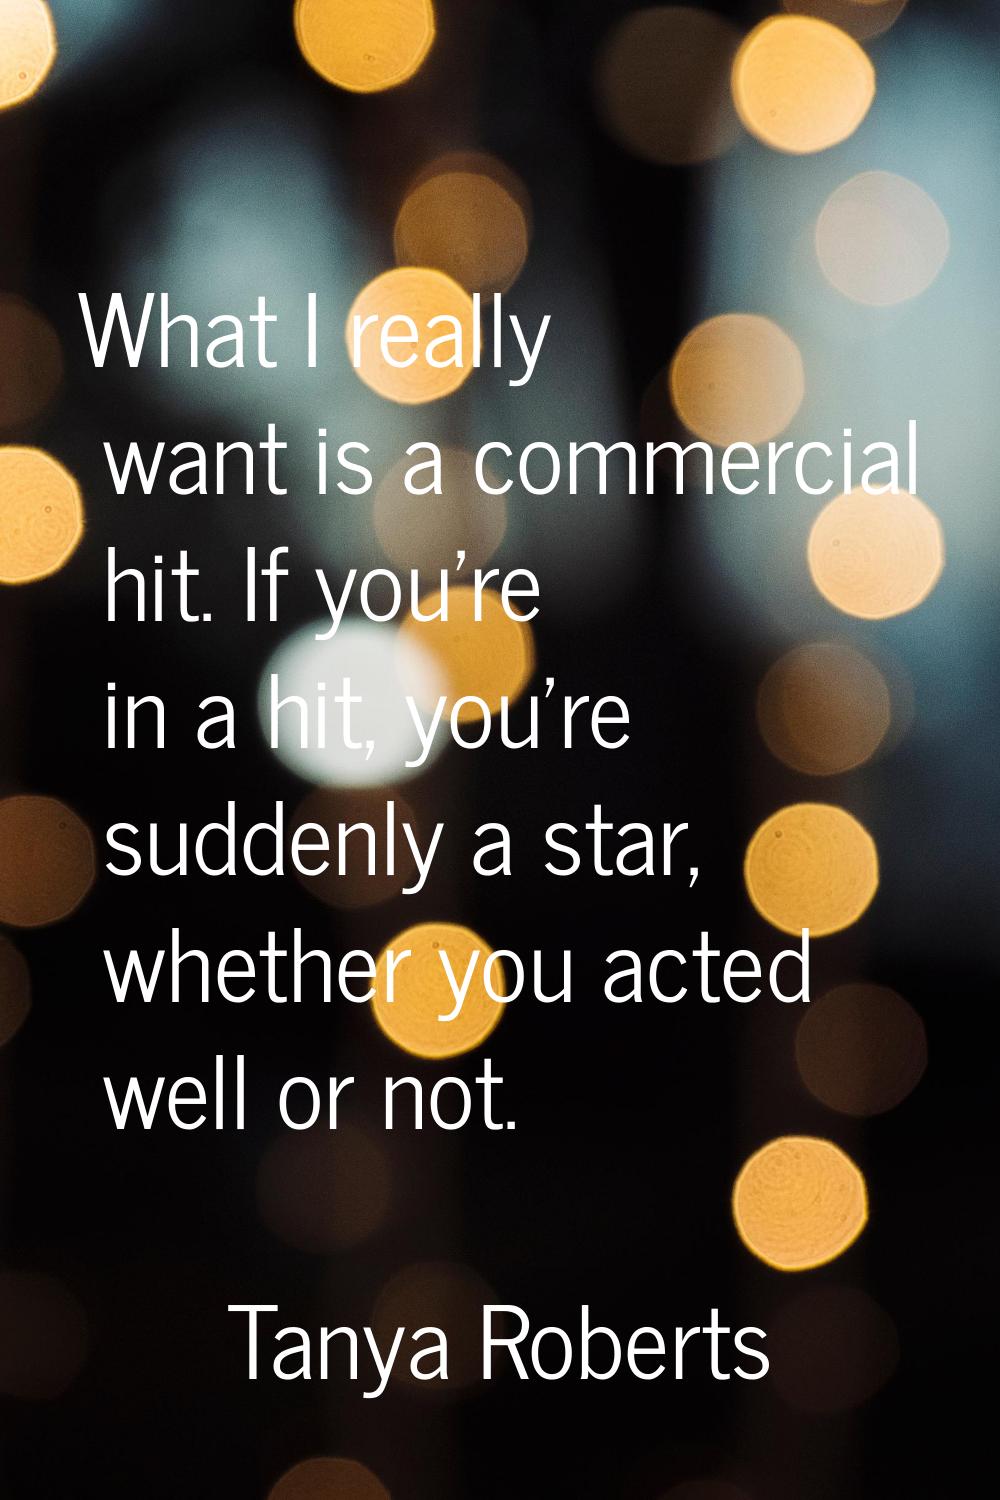 What I really want is a commercial hit. If you're in a hit, you're suddenly a star, whether you act